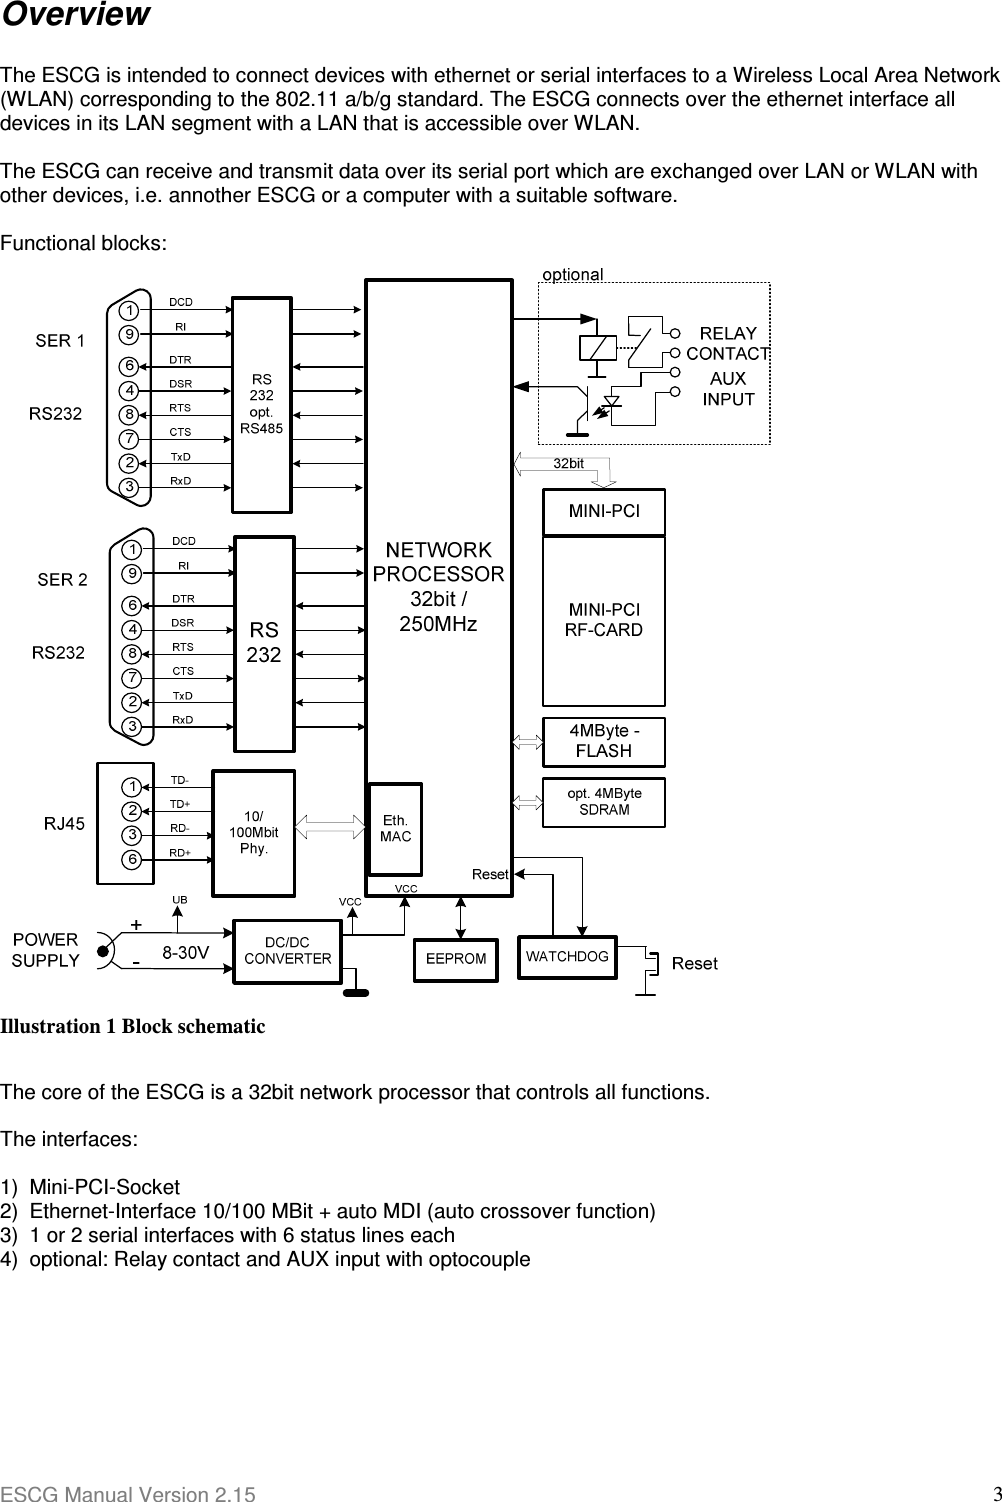 ESCG Manual Version 2.15  3  Overview  The ESCG is intended to connect devices with ethernet or serial interfaces to a Wireless Local Area Network (WLAN) corresponding to the 802.11 a/b/g standard. The ESCG connects over the ethernet interface all devices in its LAN segment with a LAN that is accessible over WLAN.   The ESCG can receive and transmit data over its serial port which are exchanged over LAN or WLAN with other devices, i.e. annother ESCG or a computer with a suitable software.  Functional blocks:   Illustration 1 Block schematic  The core of the ESCG is a 32bit network processor that controls all functions.   The interfaces:  1)  Mini-PCI-Socket 2)  Ethernet-Interface 10/100 MBit + auto MDI (auto crossover function)  3)  1 or 2 serial interfaces with 6 status lines each  4)  optional: Relay contact and AUX input with optocouple   